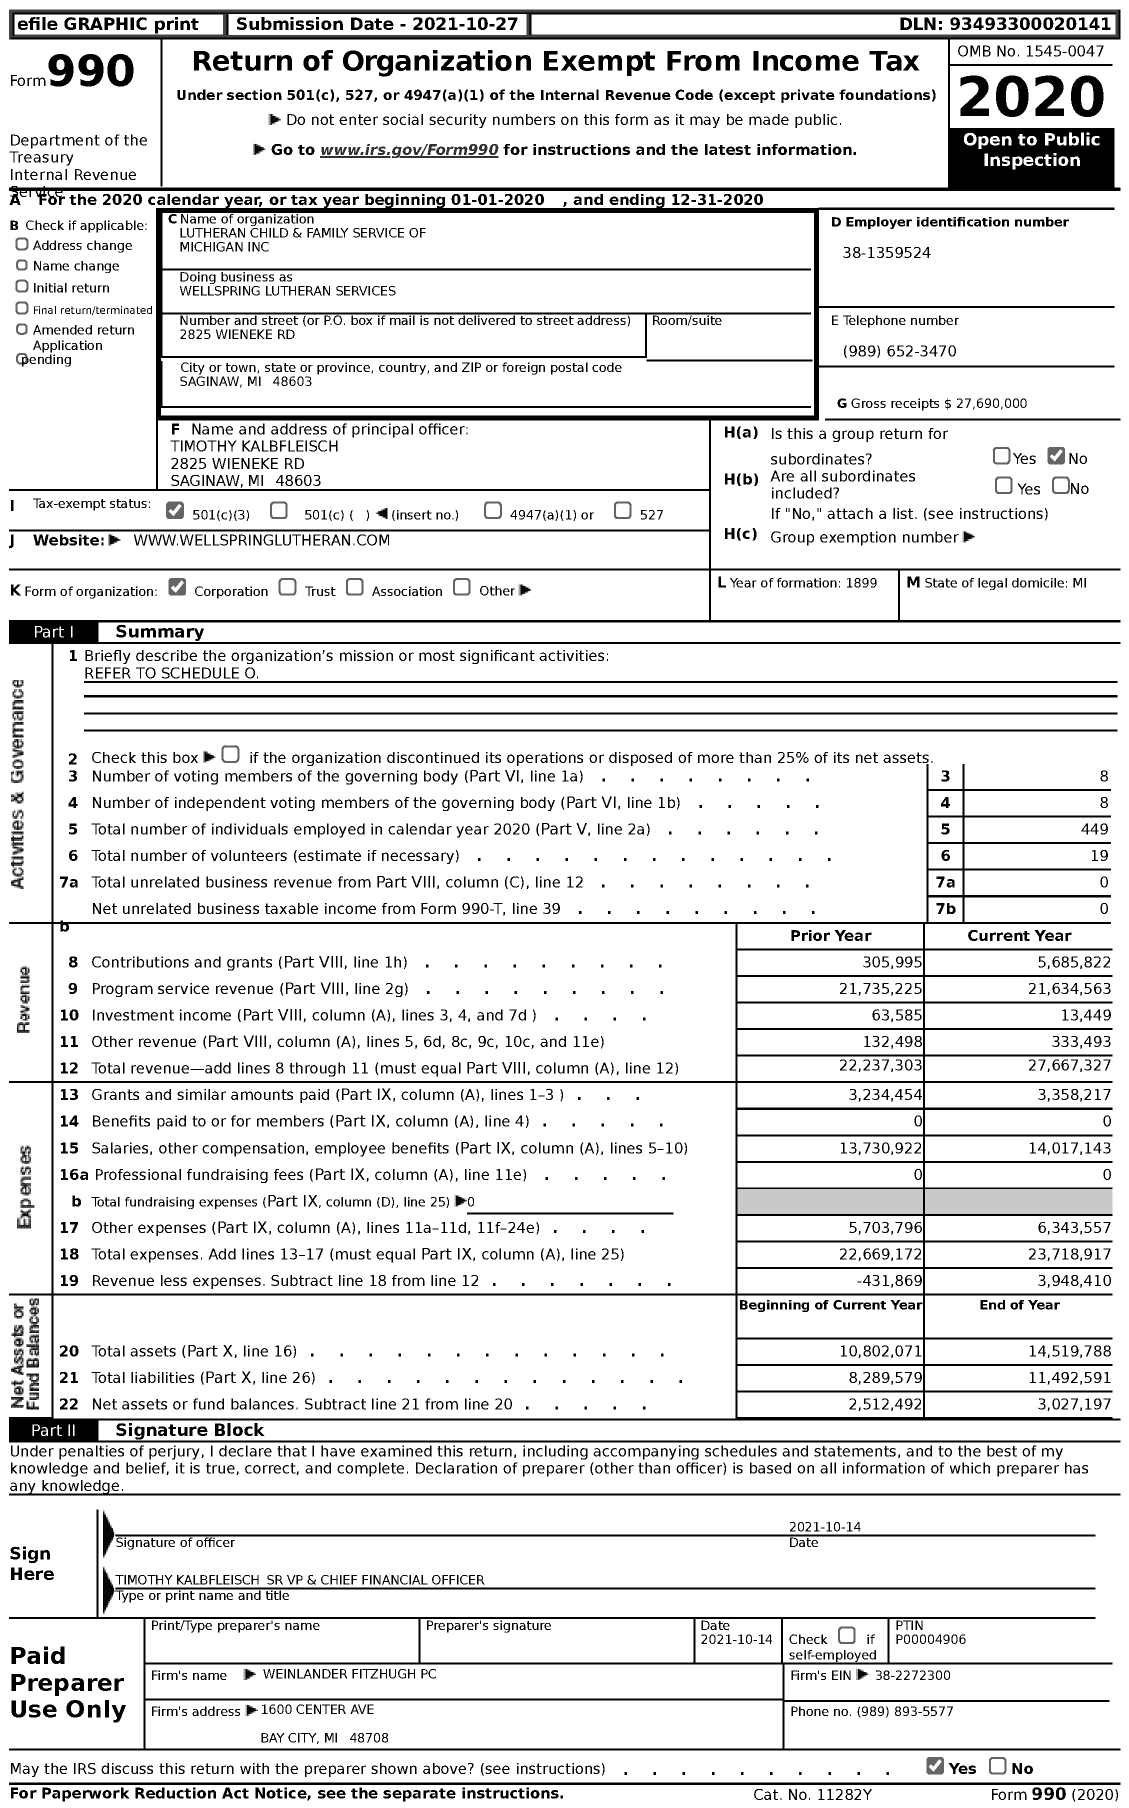 Image of first page of 2020 Form 990 for Wellspring Lutheran Services / Lutheran Child & Family Service of Michigan Inc